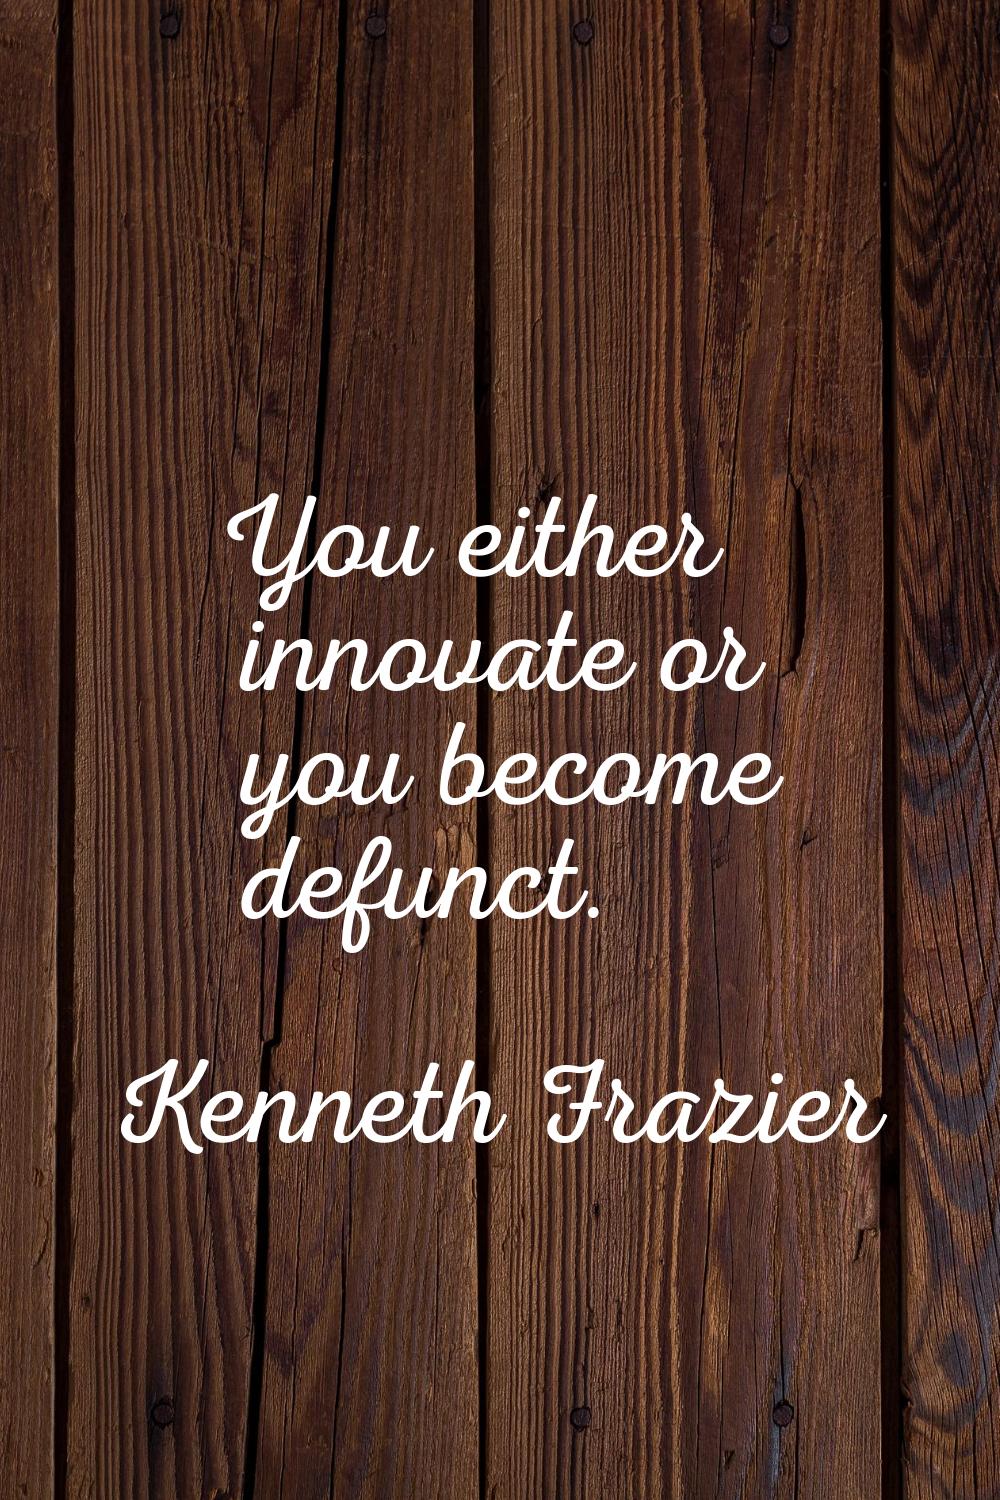 You either innovate or you become defunct.